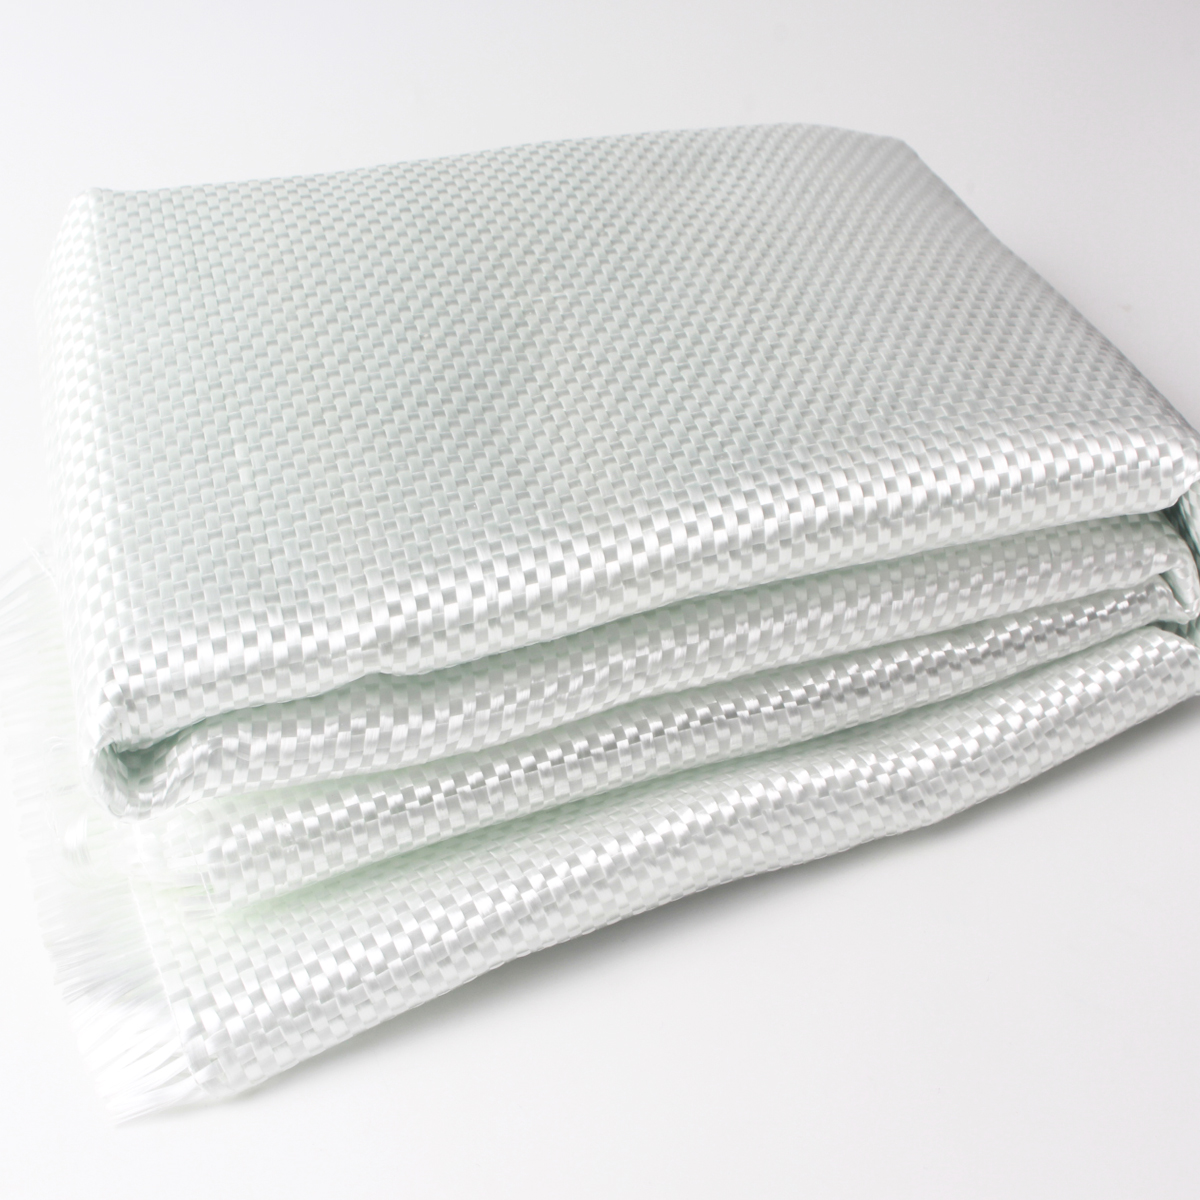 24gsm,55gsm,135gsm,160gsm,200gsm,400gsm E-Class Fiberglass Cloth Glassfiber Woven Fabric For Surfboards